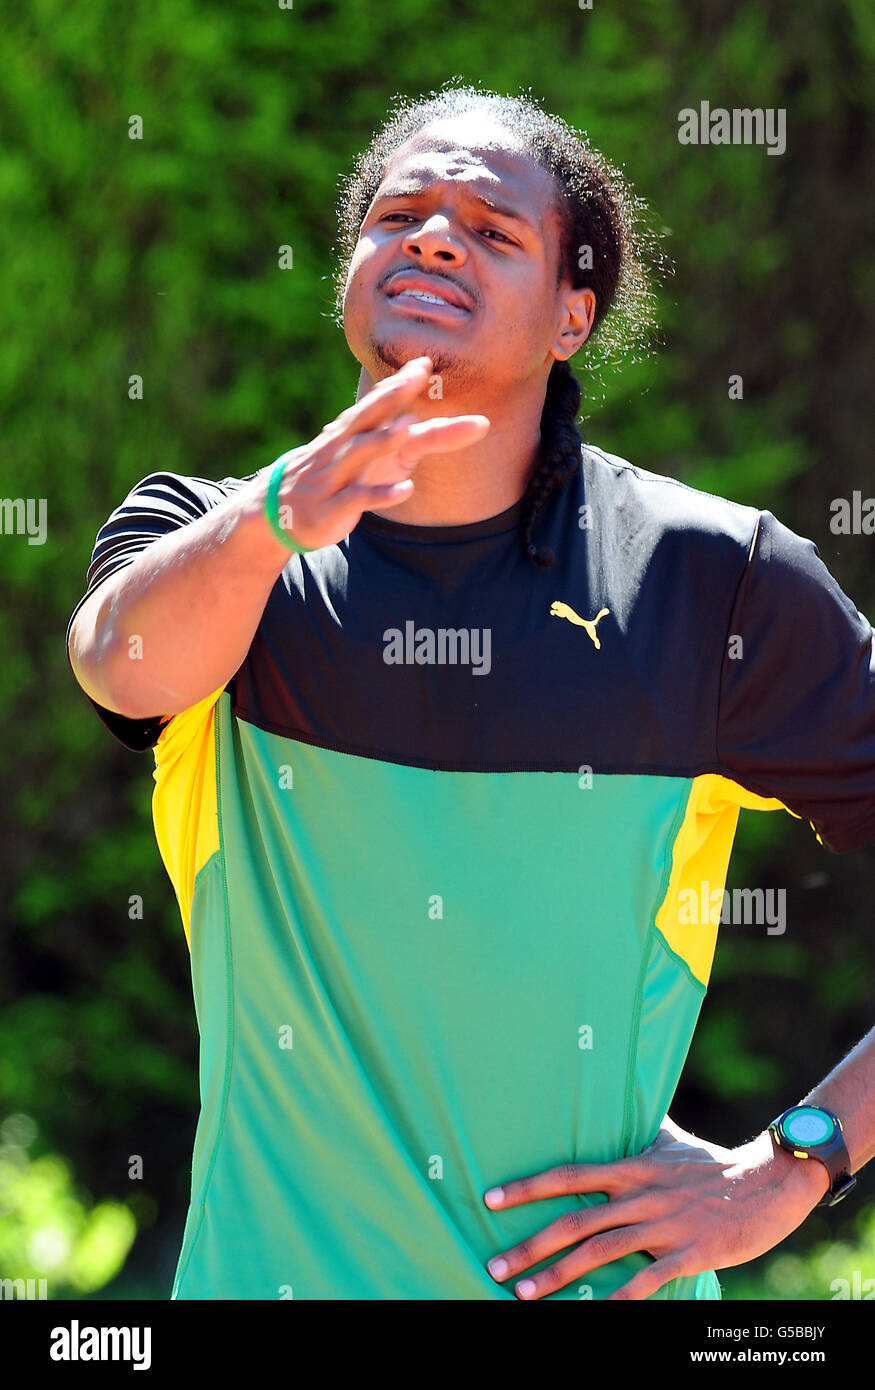 Member Of The Jamaican Track And Field Team Jermaine Gonzales During 